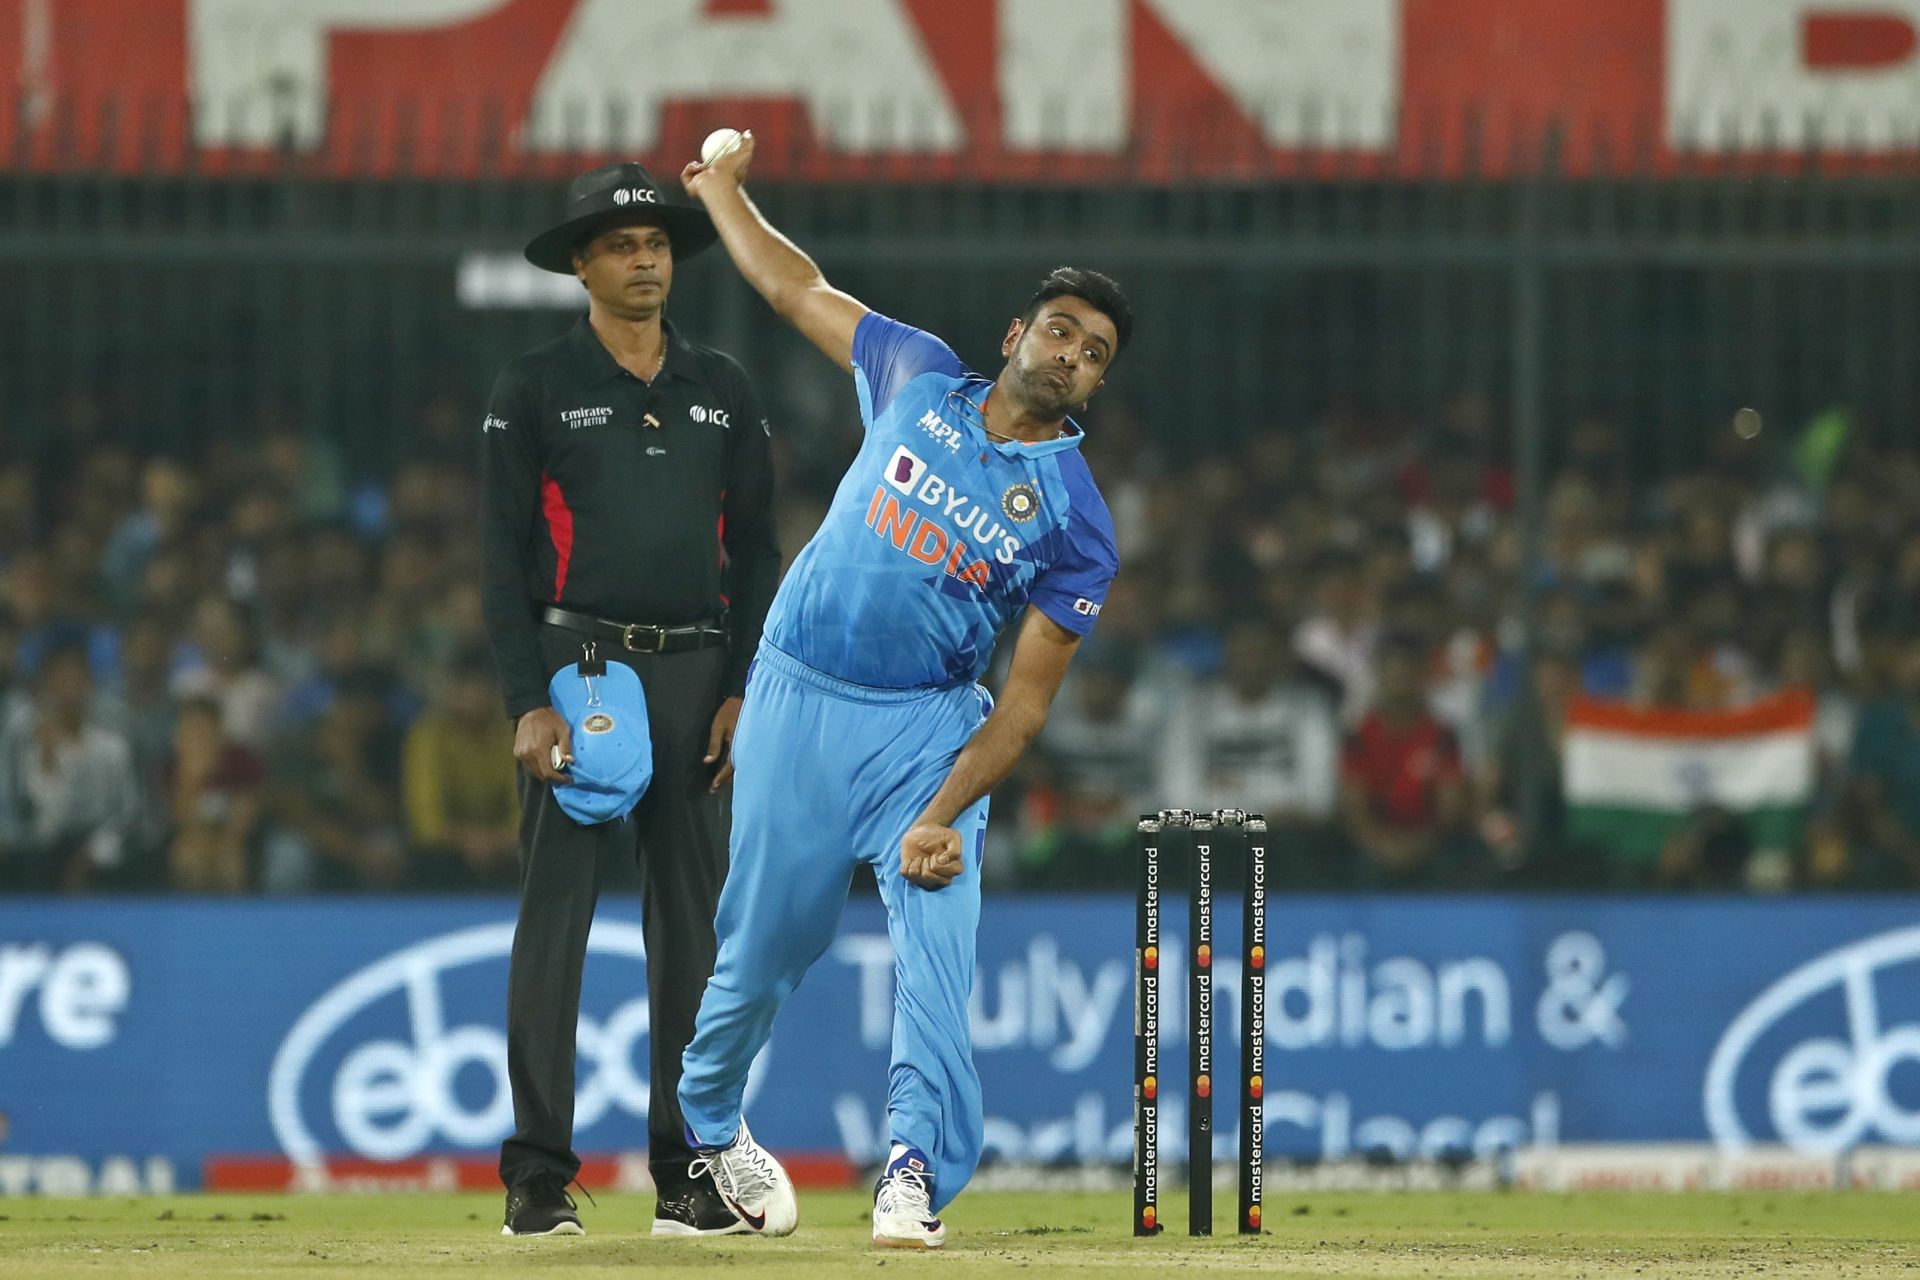 Ravichandran Ashwin conceded 27 runs in the two overs he bowled against England.